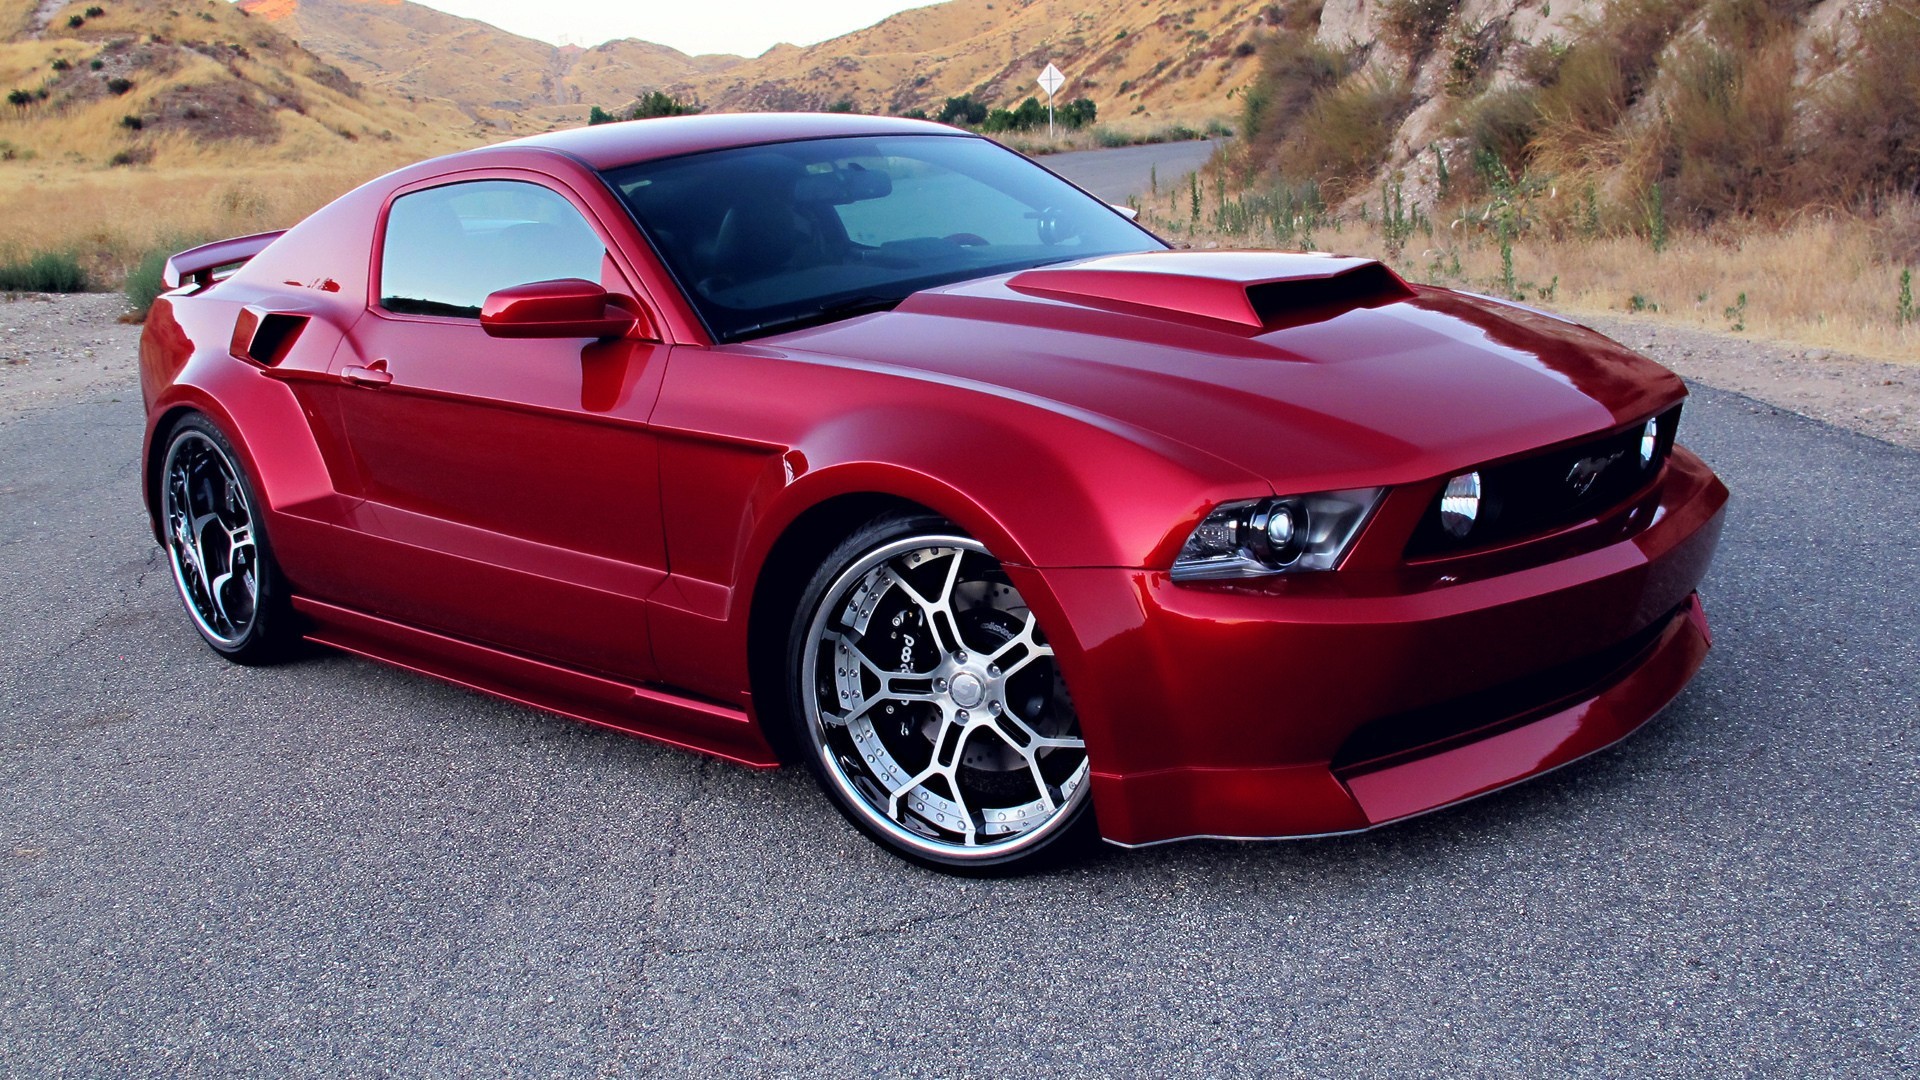 Ford Mustang, Red Cars Wallpaper